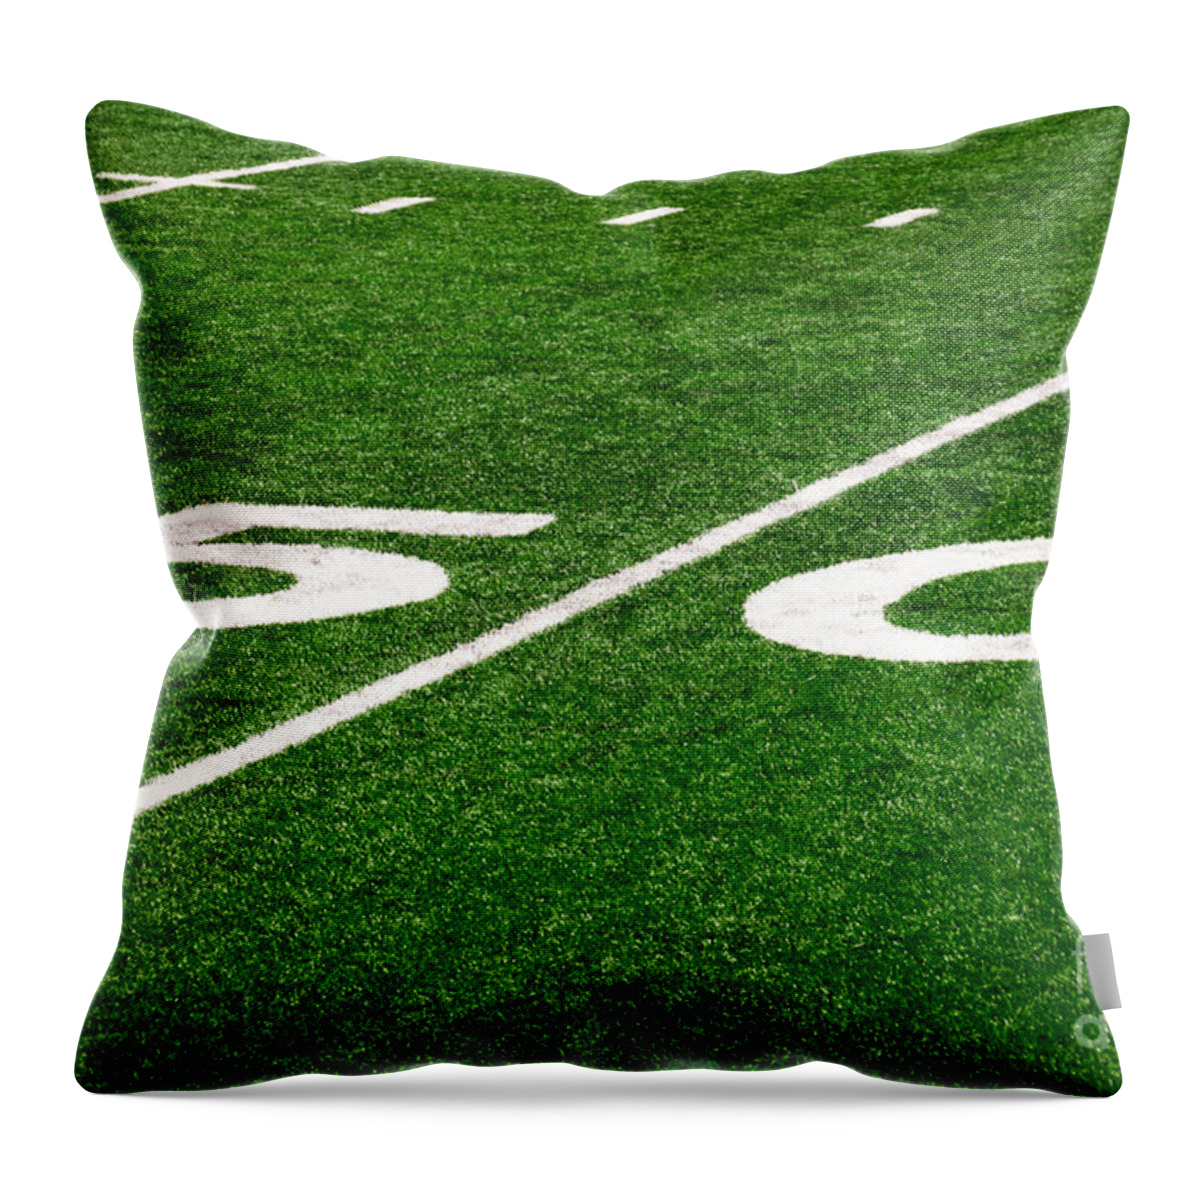 50 Yard Line Throw Pillow featuring the photograph 50 Yard Line on Football Field by Paul Velgos